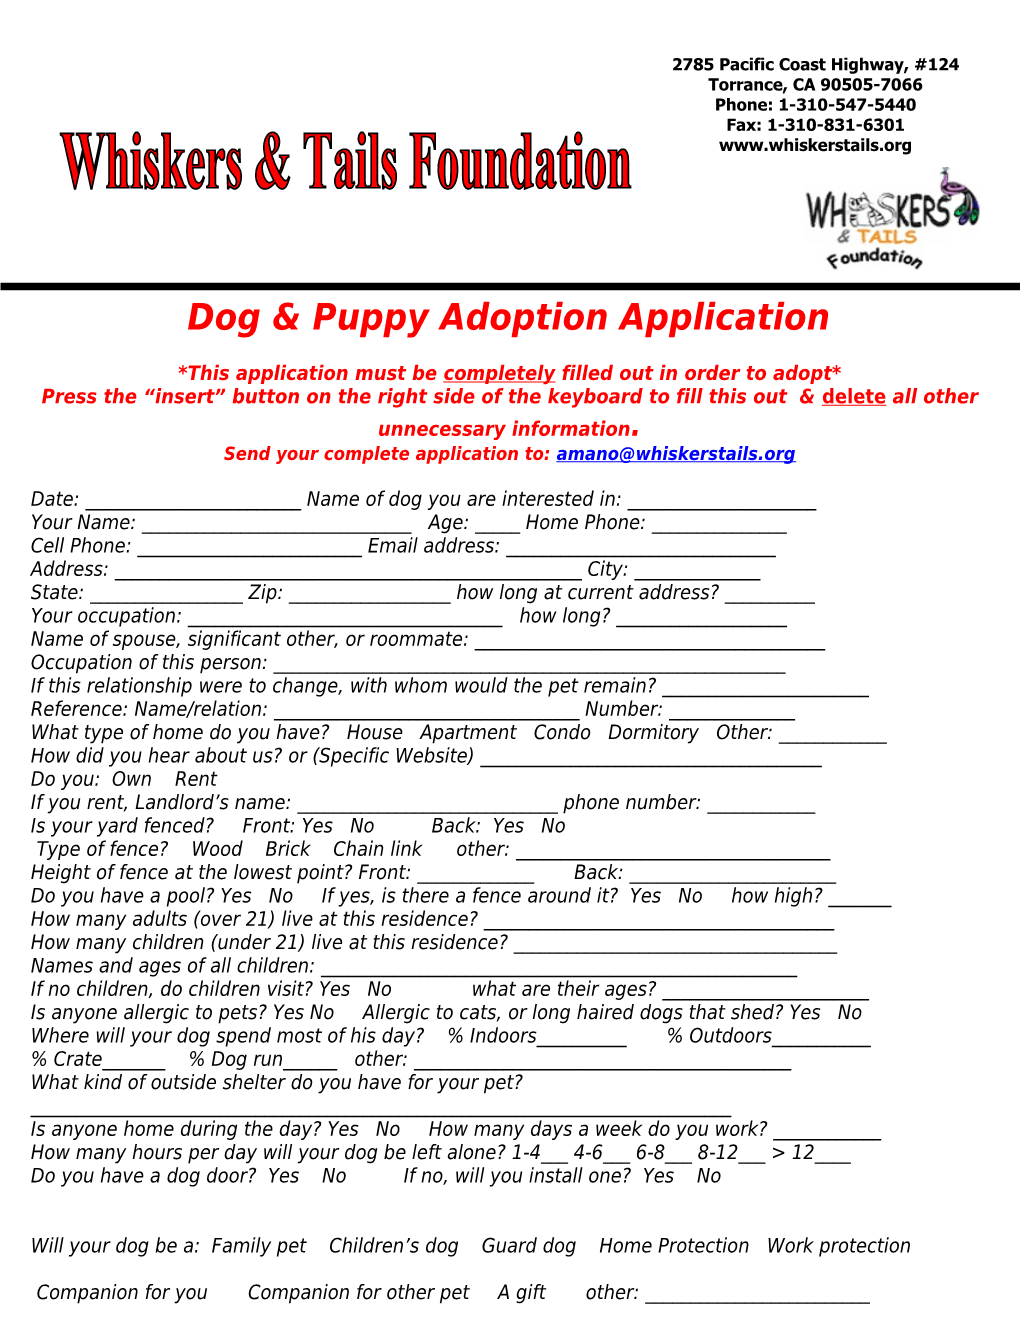 *This Application Must Be Completely Filled out in Order to Adopt*